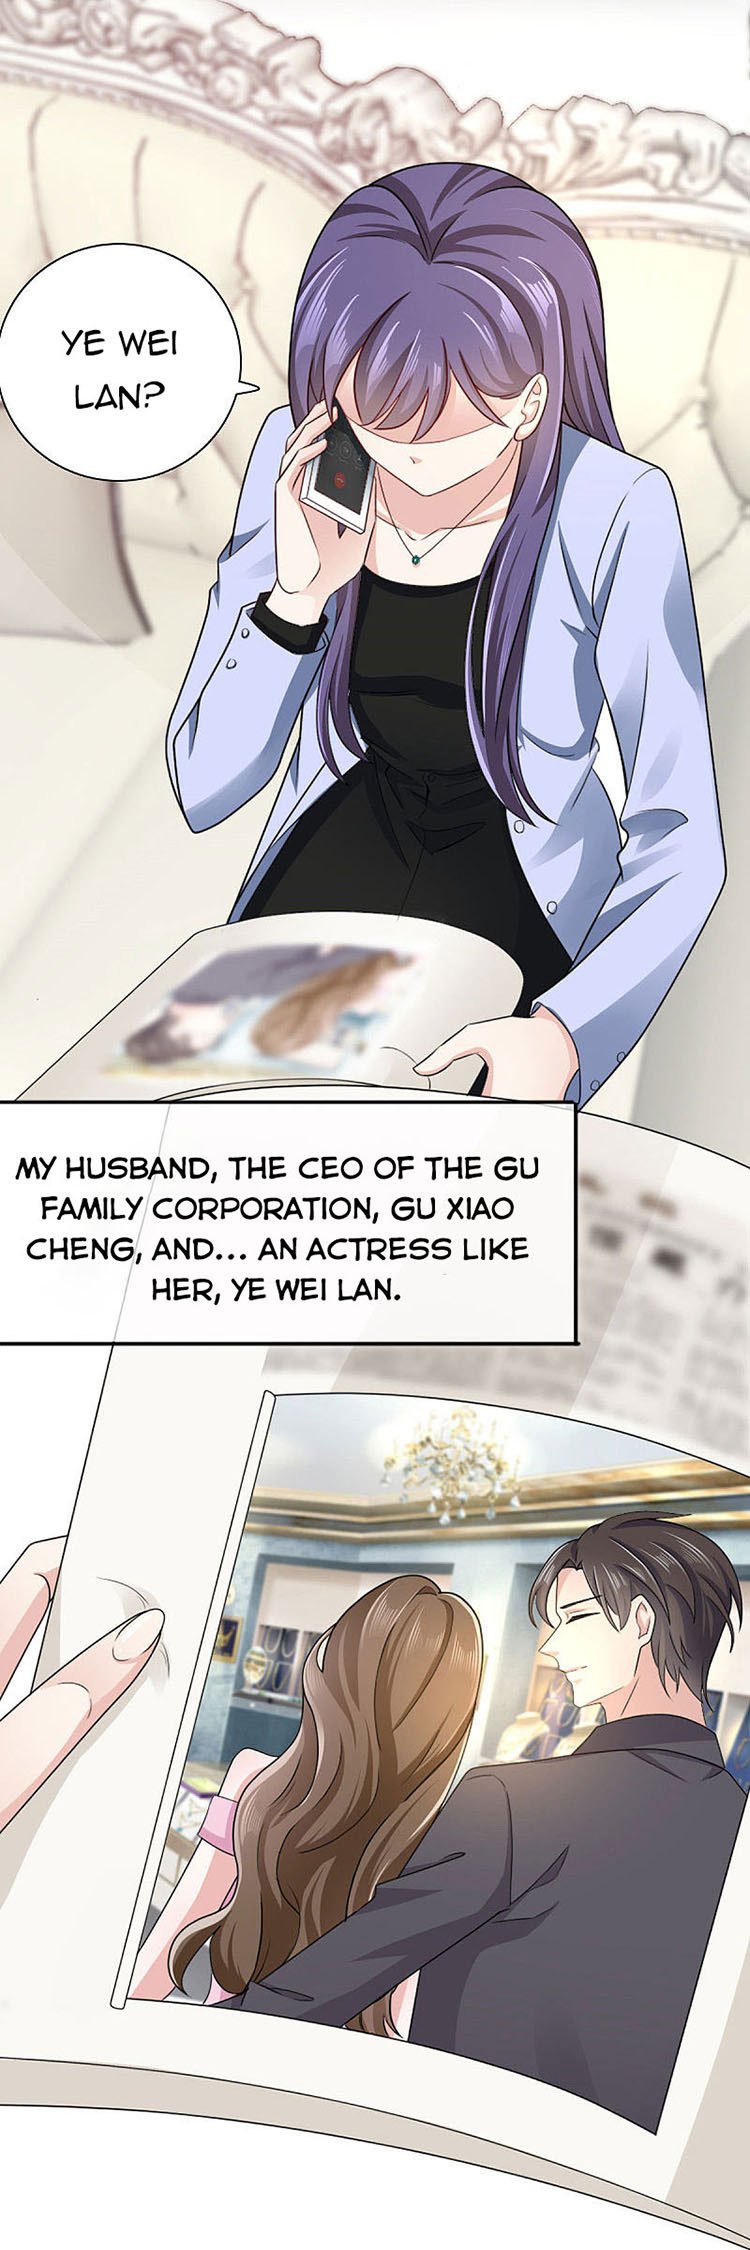 A deadly sexy wife: The CEO wants to remarry Chapter 1 - Page 1